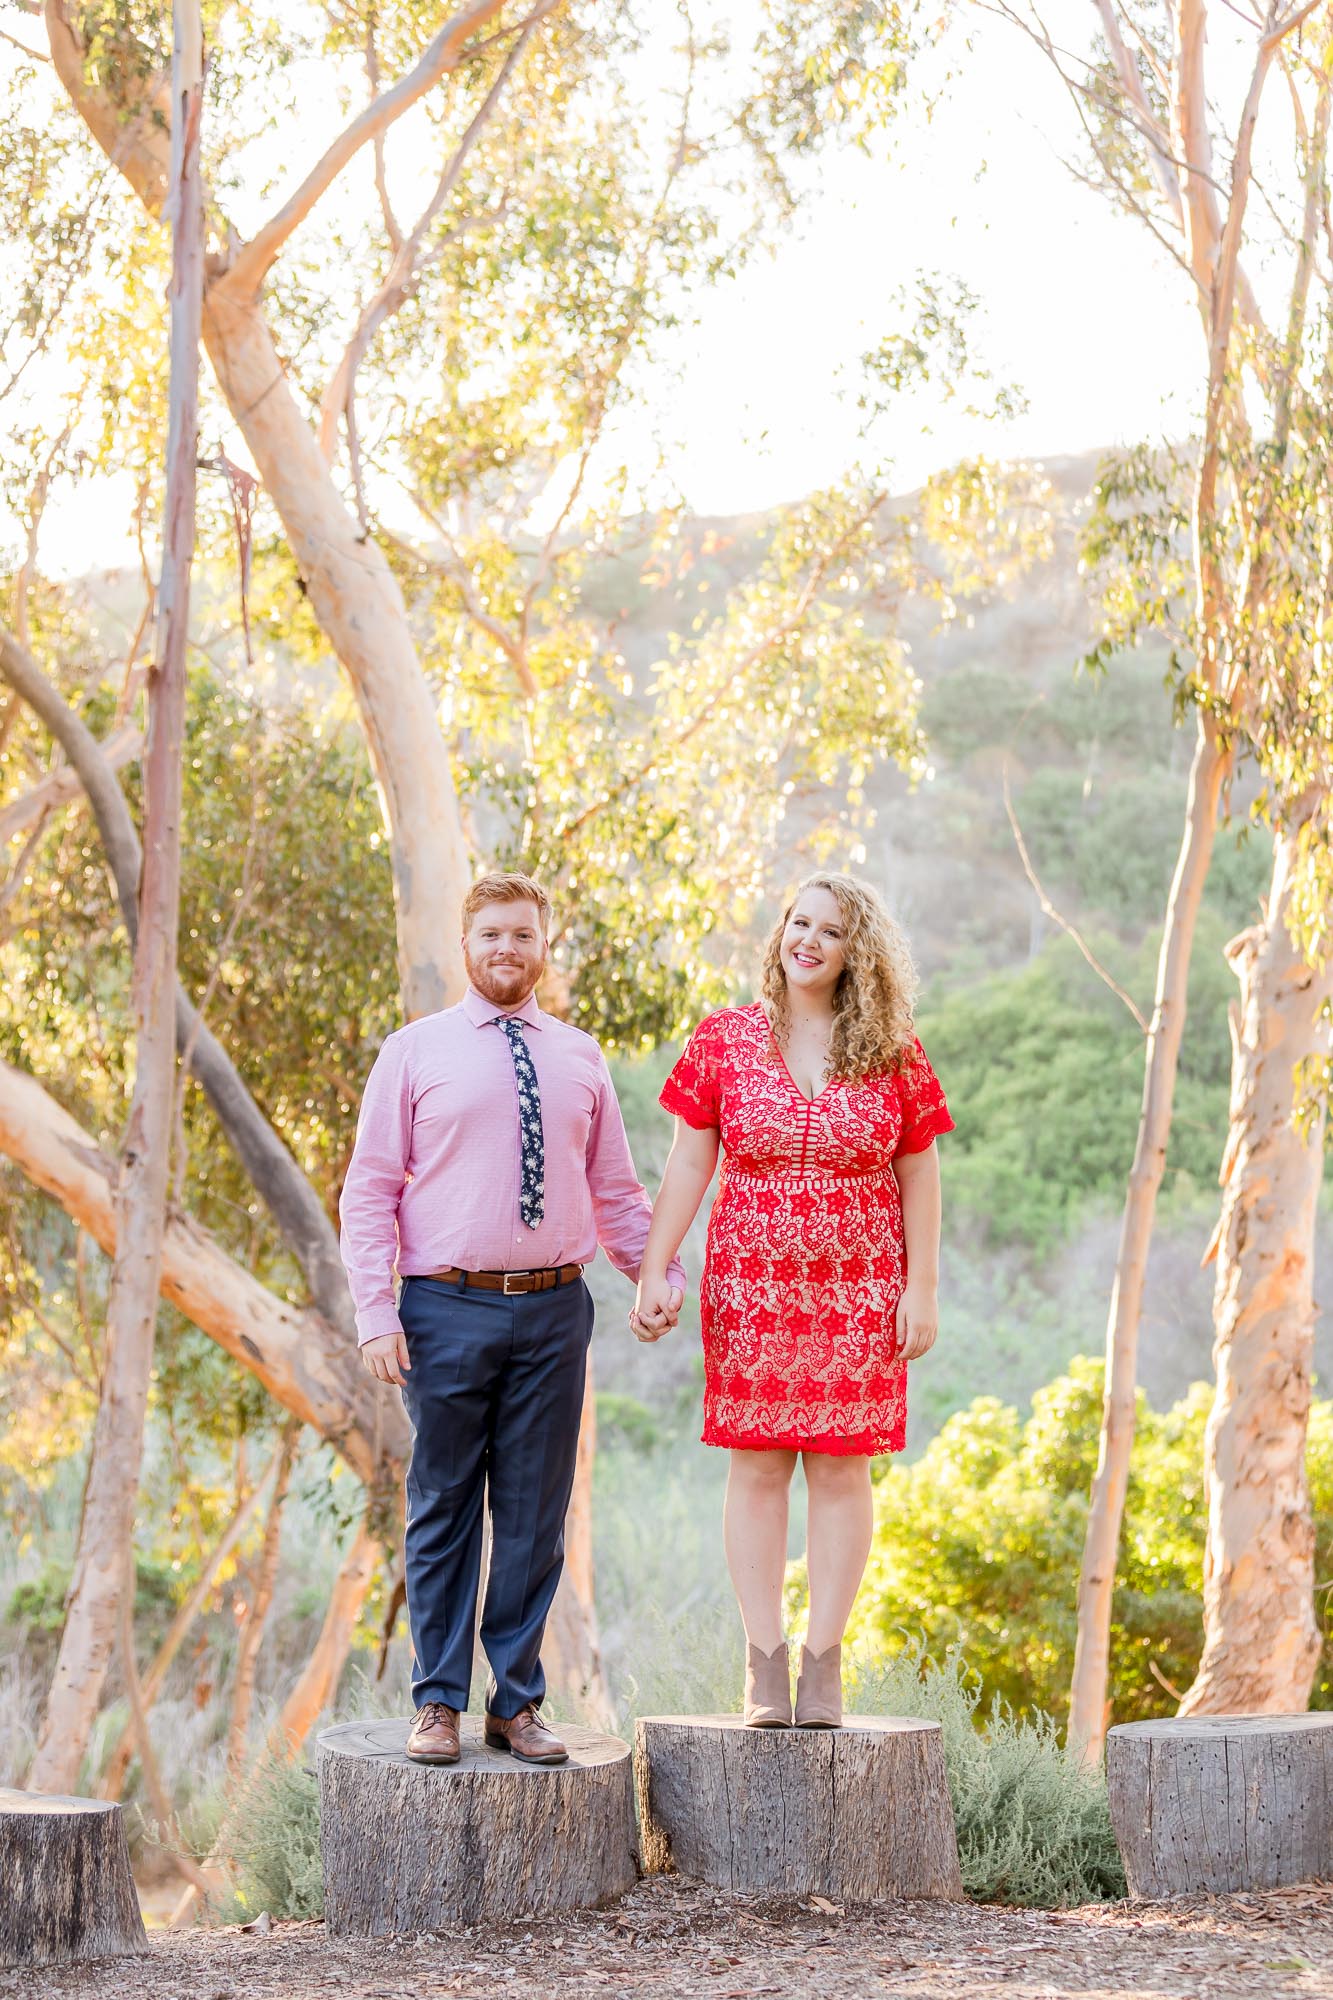 Tierney_Gregory_Batiquitos_Lagoon_Engagement_Session_079.jpg